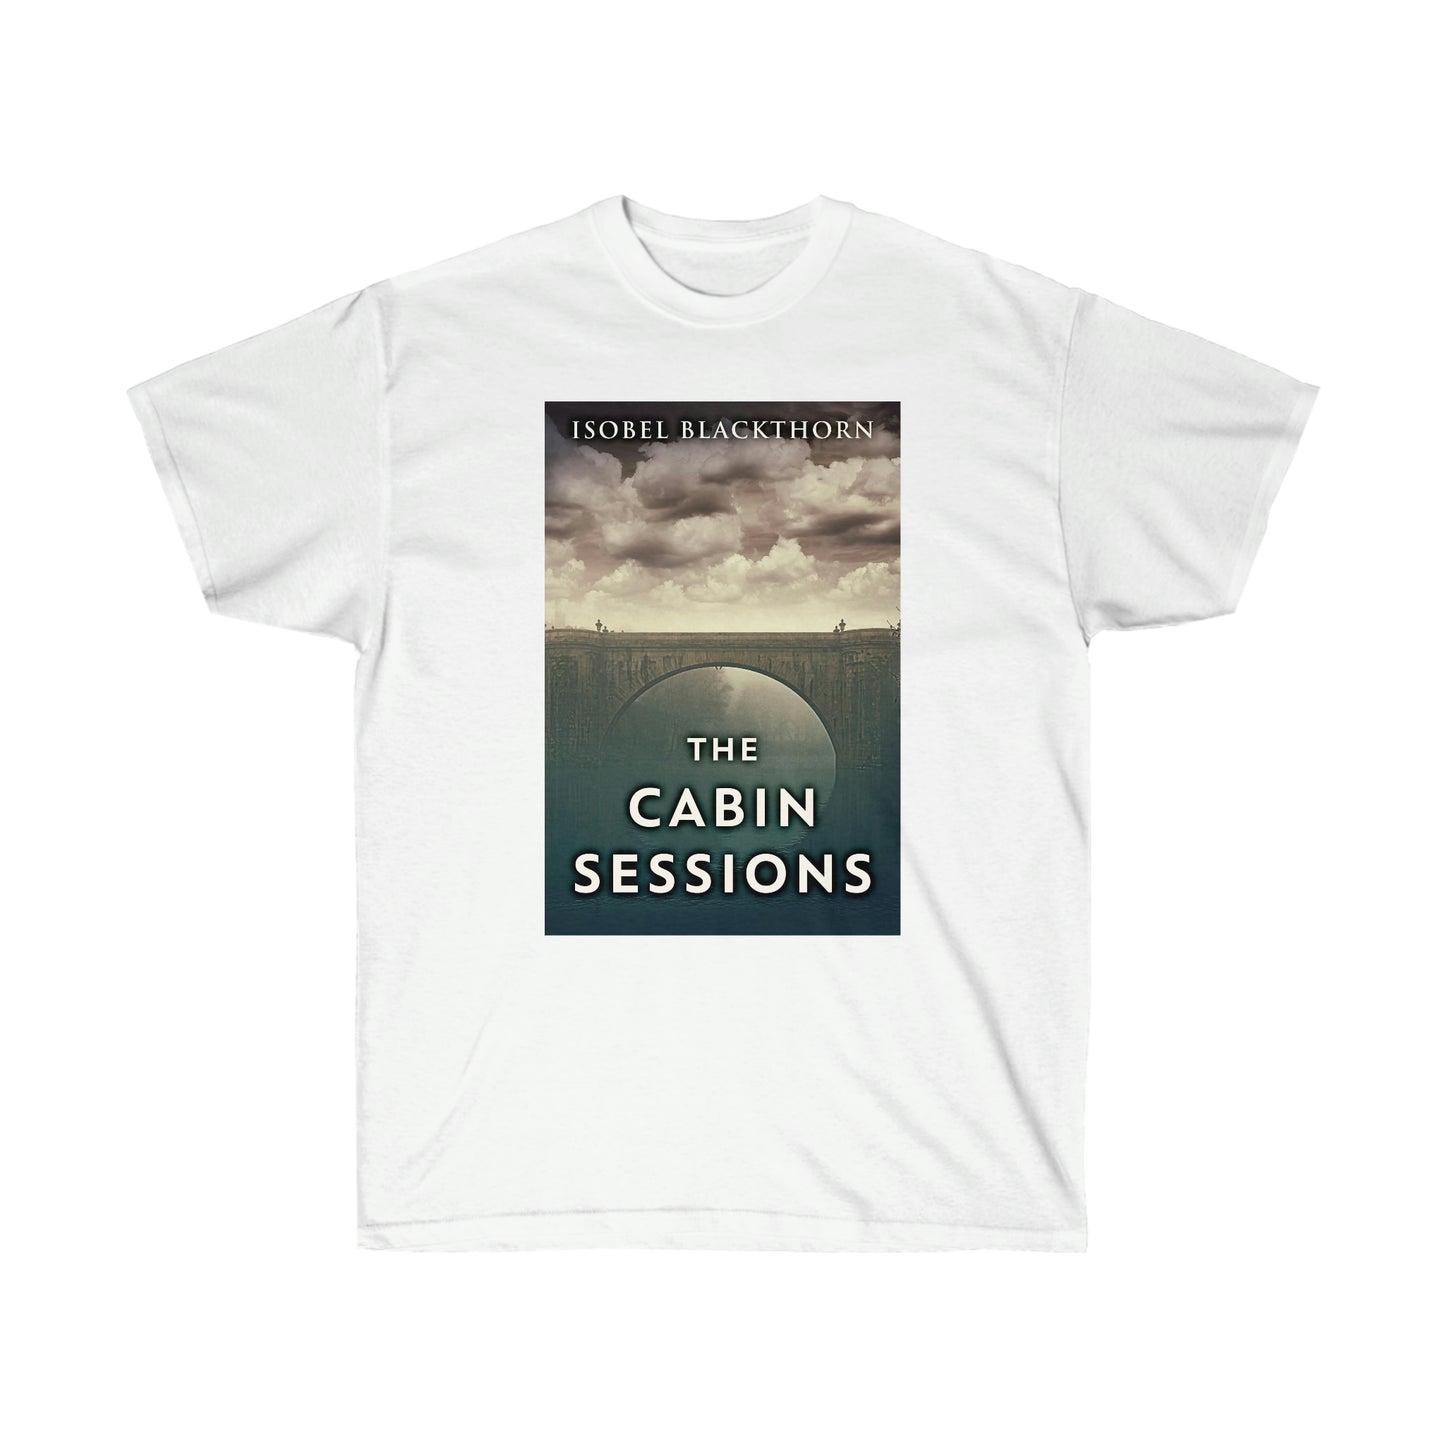 The Cabin Sessions - Unisex T-Shirt